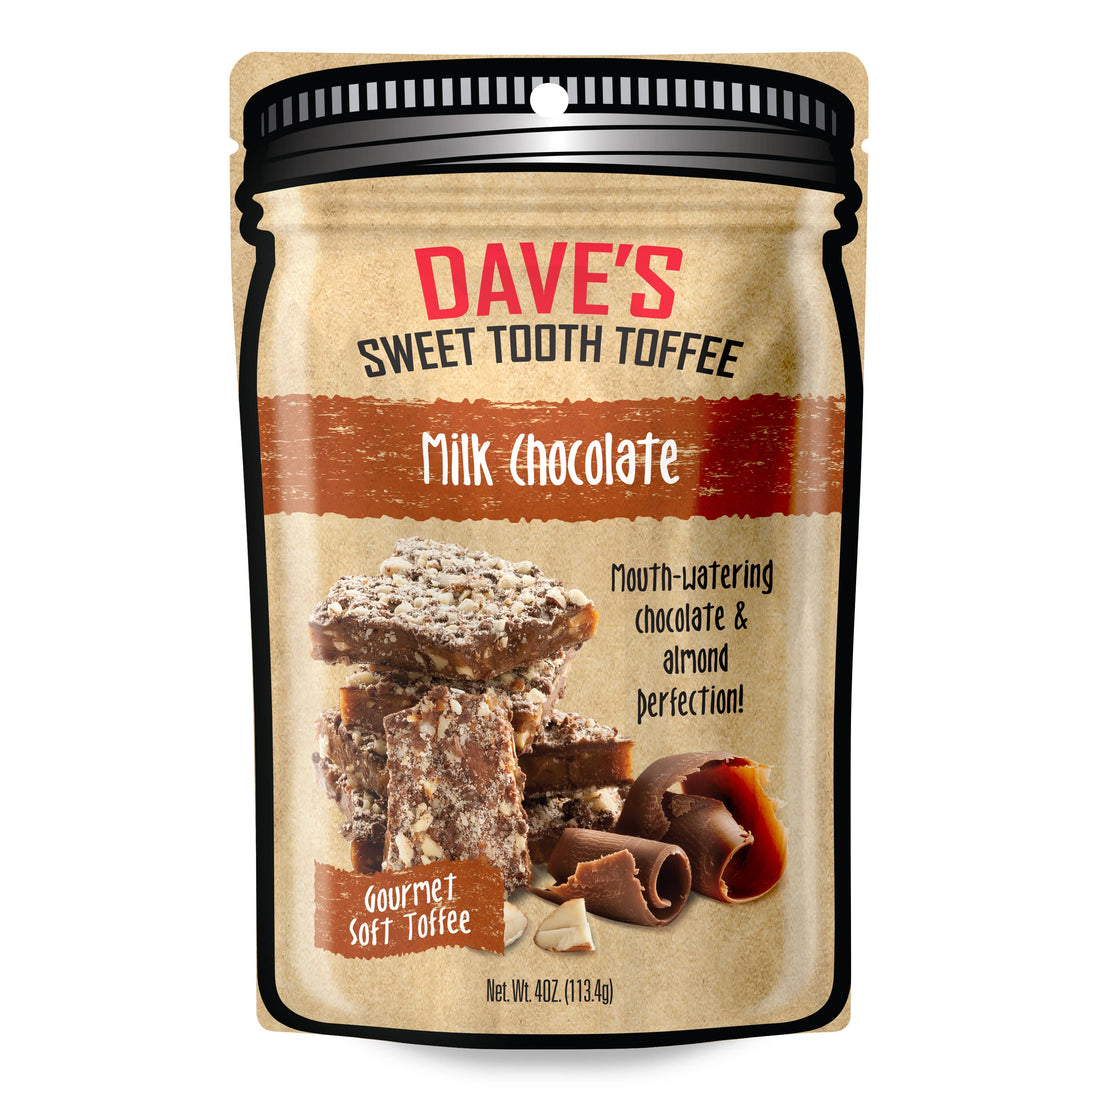 Dave's Sweet Tooth - Milk Chocolate